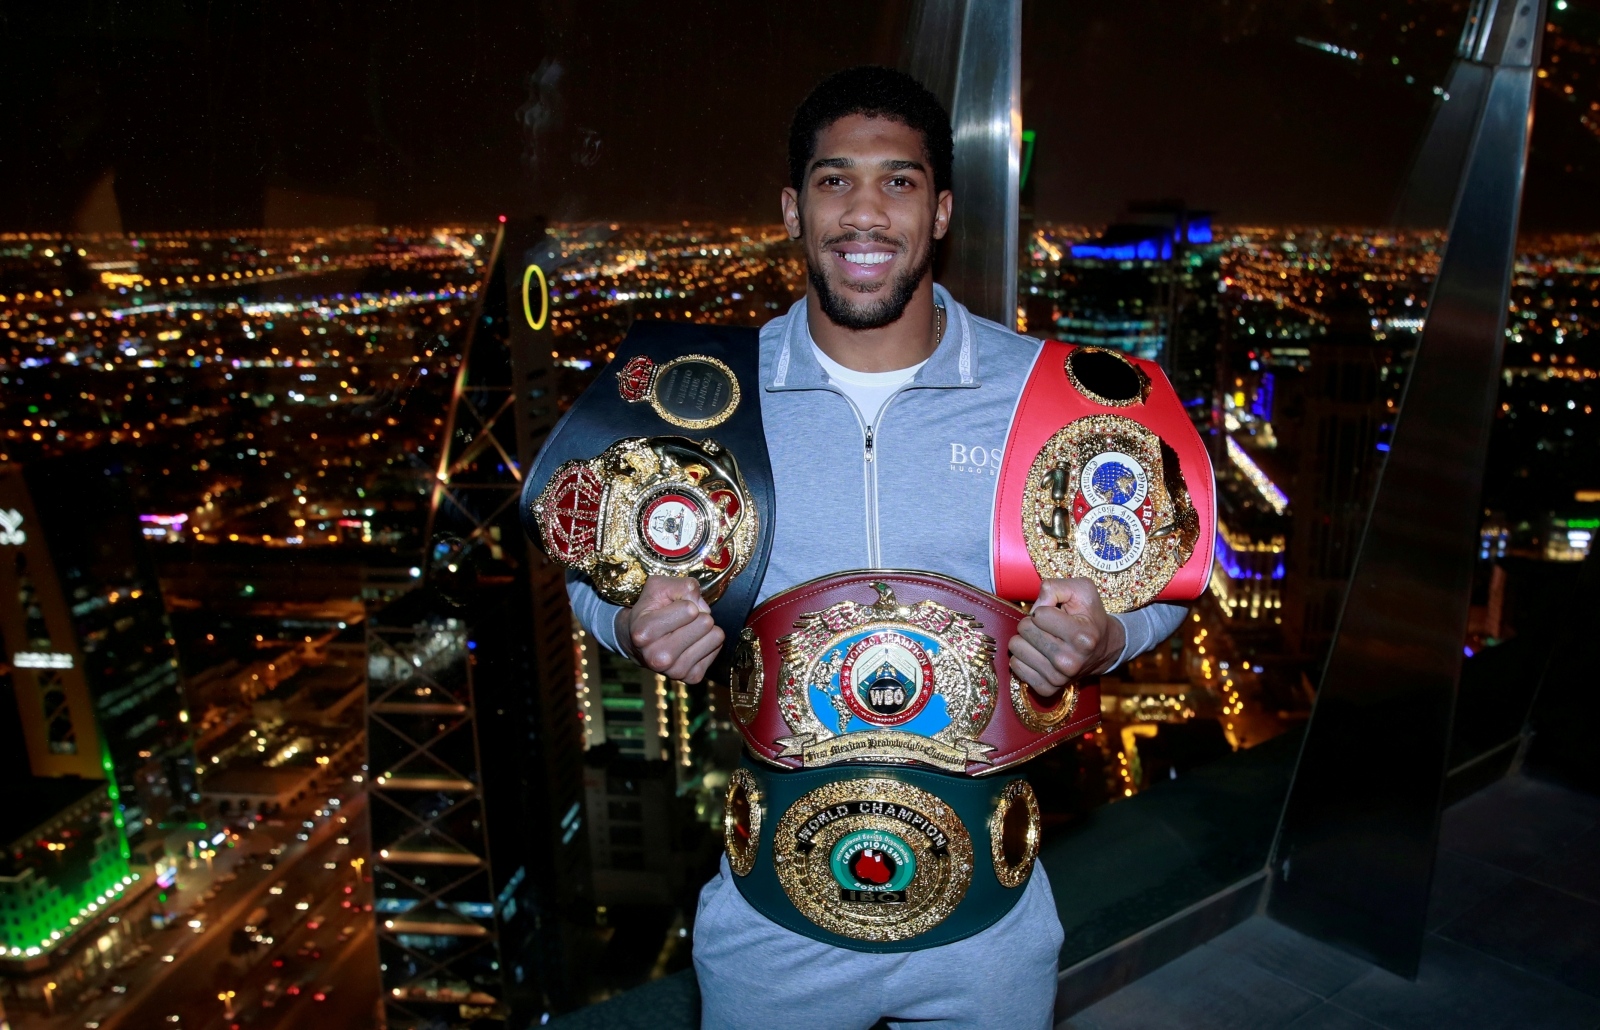 FILE PHOTO: Anthony Joshua poses with the IBF, WBA, WBO & IBO World Heavyweight belts after winning his title fight against Andy Ruiz Jr FILE PHOTO: Boxing - Anthony Joshua poses with the IBF, WBA, WBO & IBO World Heavyweight belts after winning his title fight against Andy Ruiz Jr - Al Faisaliah Tower, Riyadh, Saudi Arabia - December 8, 2019  Anthony Joshua poses with the belts  Action Images via Reuters/Andrew Couldridge/File Photo Andrew Couldridge